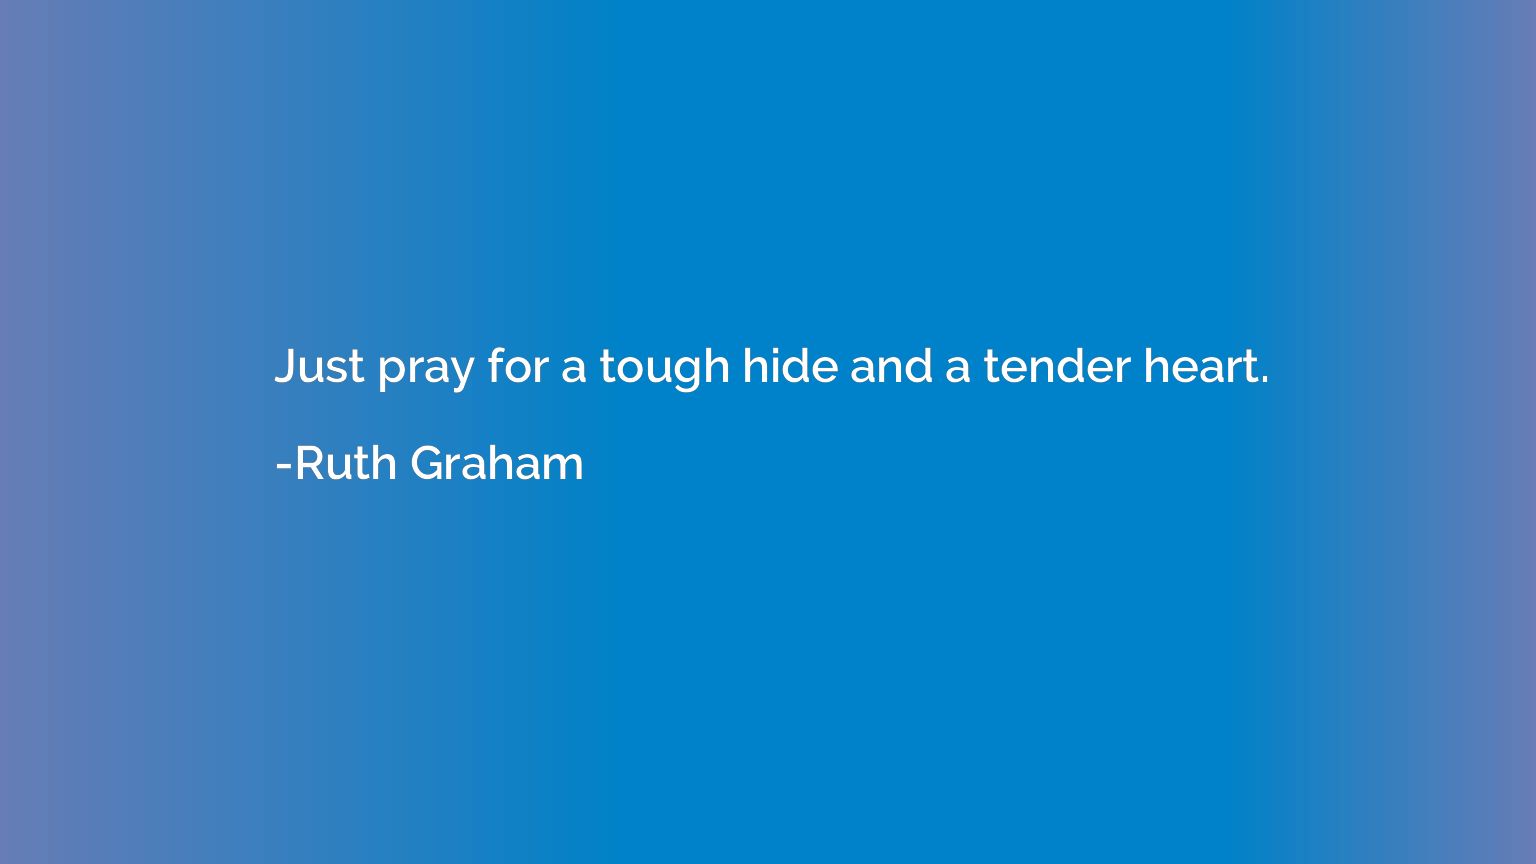 Just pray for a tough hide and a tender heart.